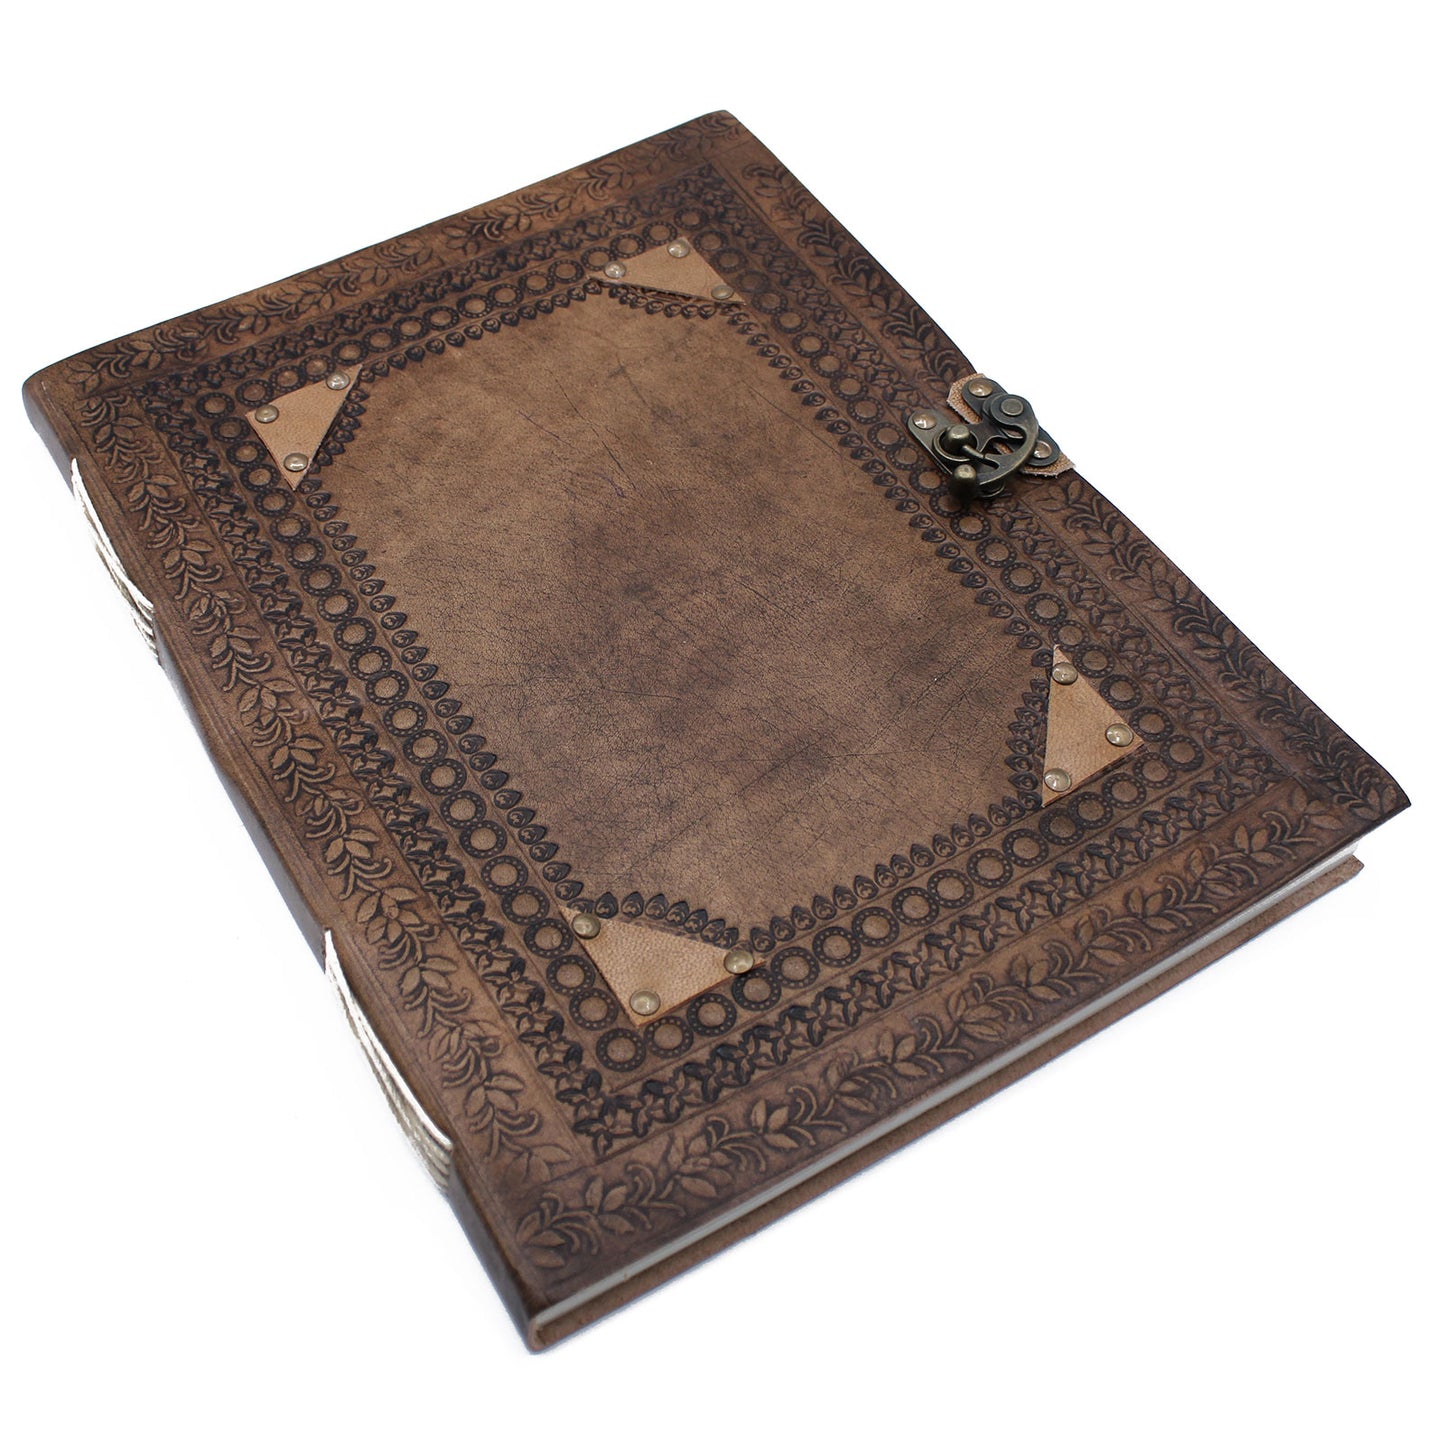 Huge Customisable Leather Book 10x13 (200 pages)